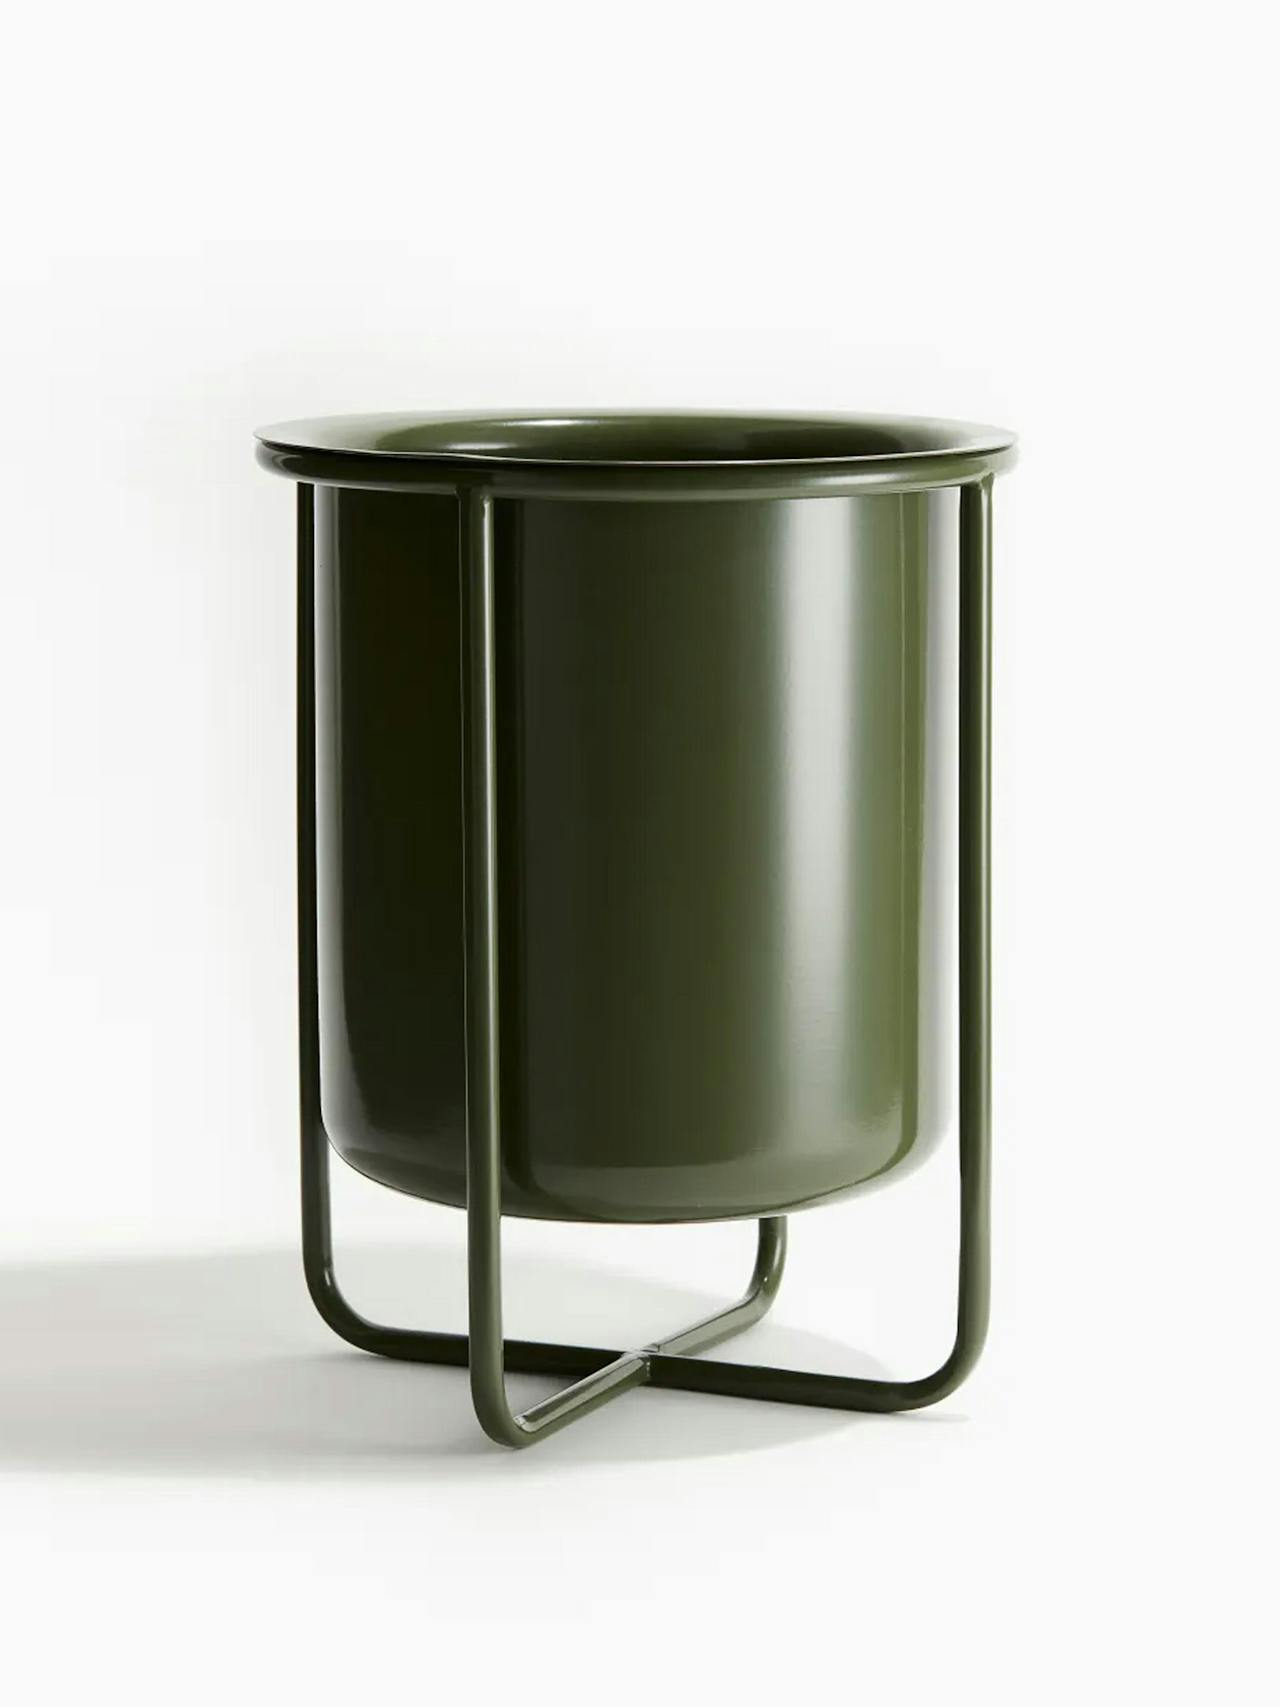 Large metal plant pot on a stand